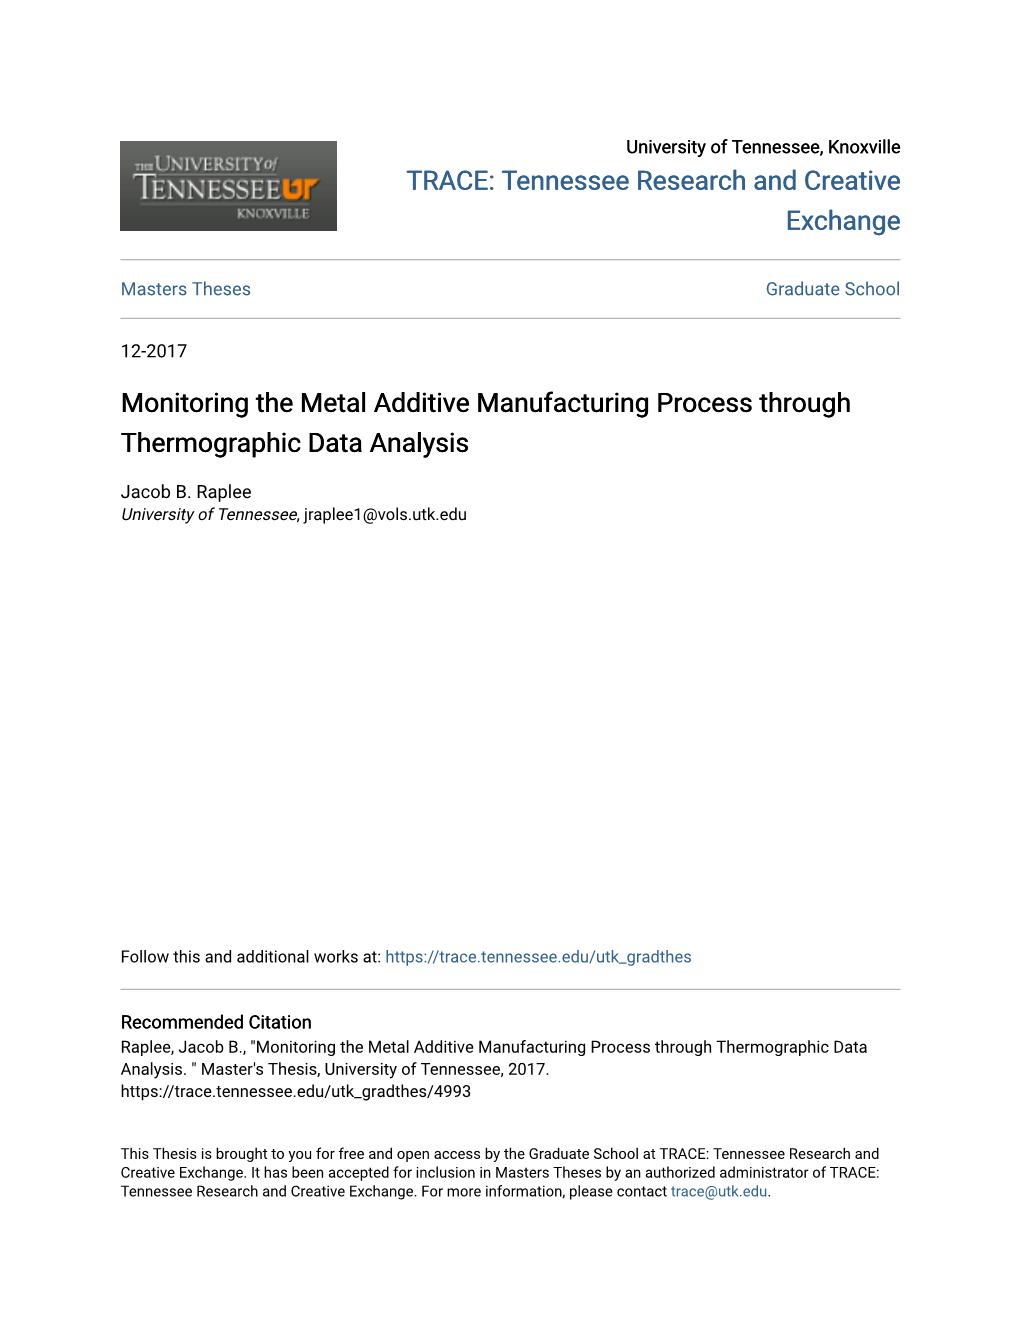 Monitoring the Metal Additive Manufacturing Process Through Thermographic Data Analysis